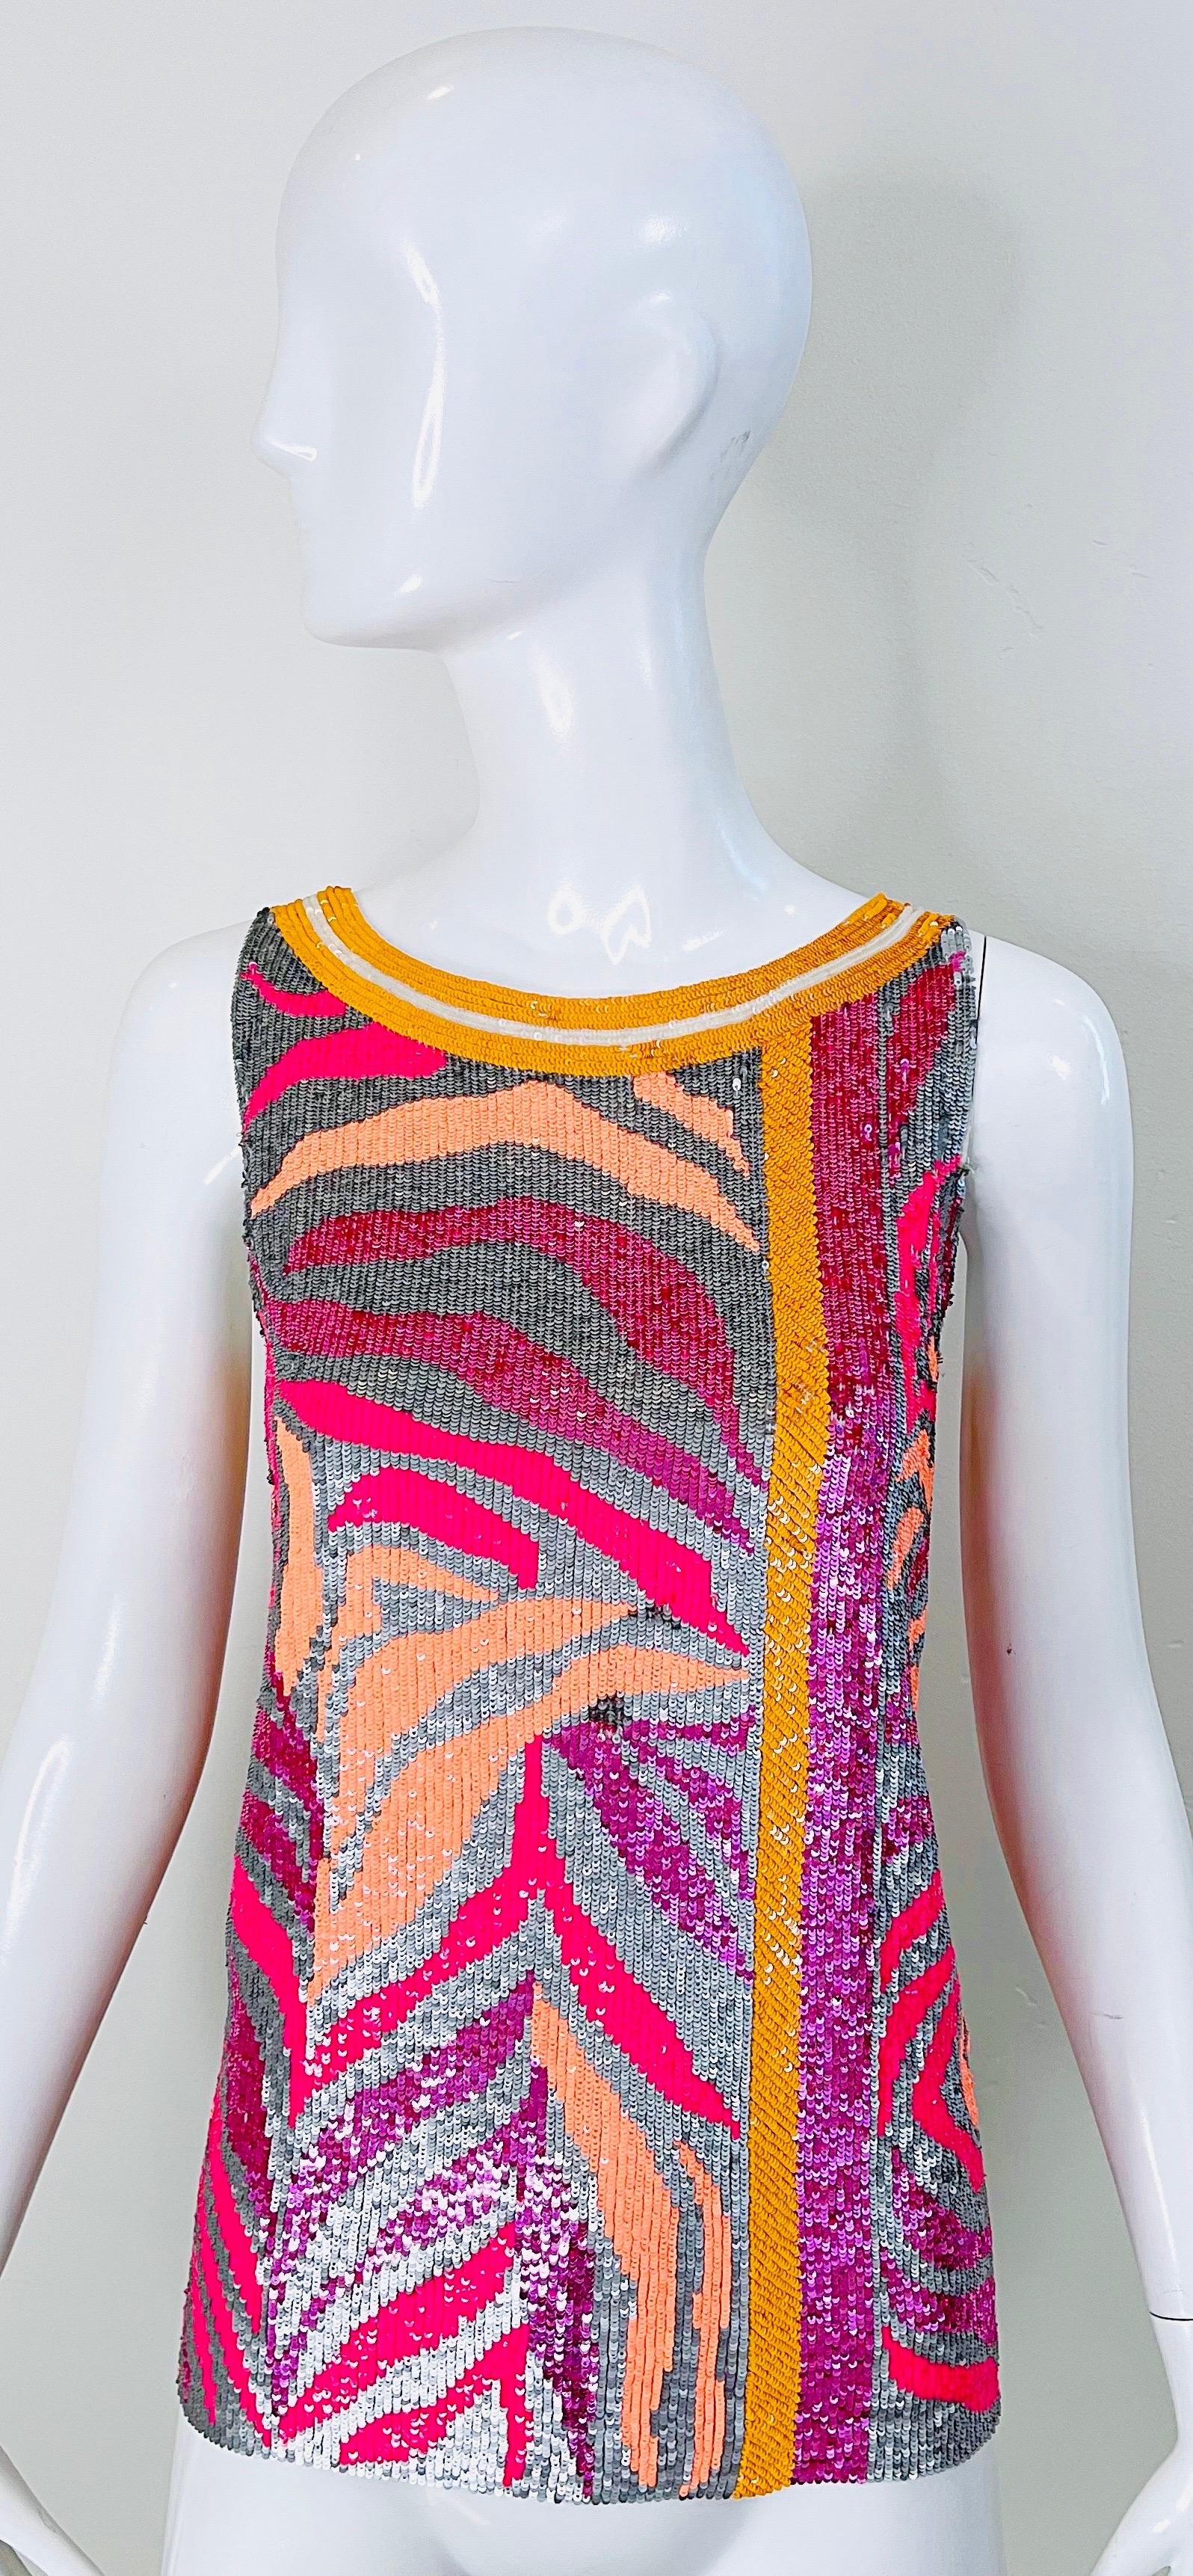 Amazing new with tags BLUMARINE COUTURE Runway Spring 2008 silk chiffon neon abstract zebra print full sequined sleeveless top ! Features thousands of hand-sewn sequins throughout the entire top. Bright neon colors of hot pink, fuchsia and orange.